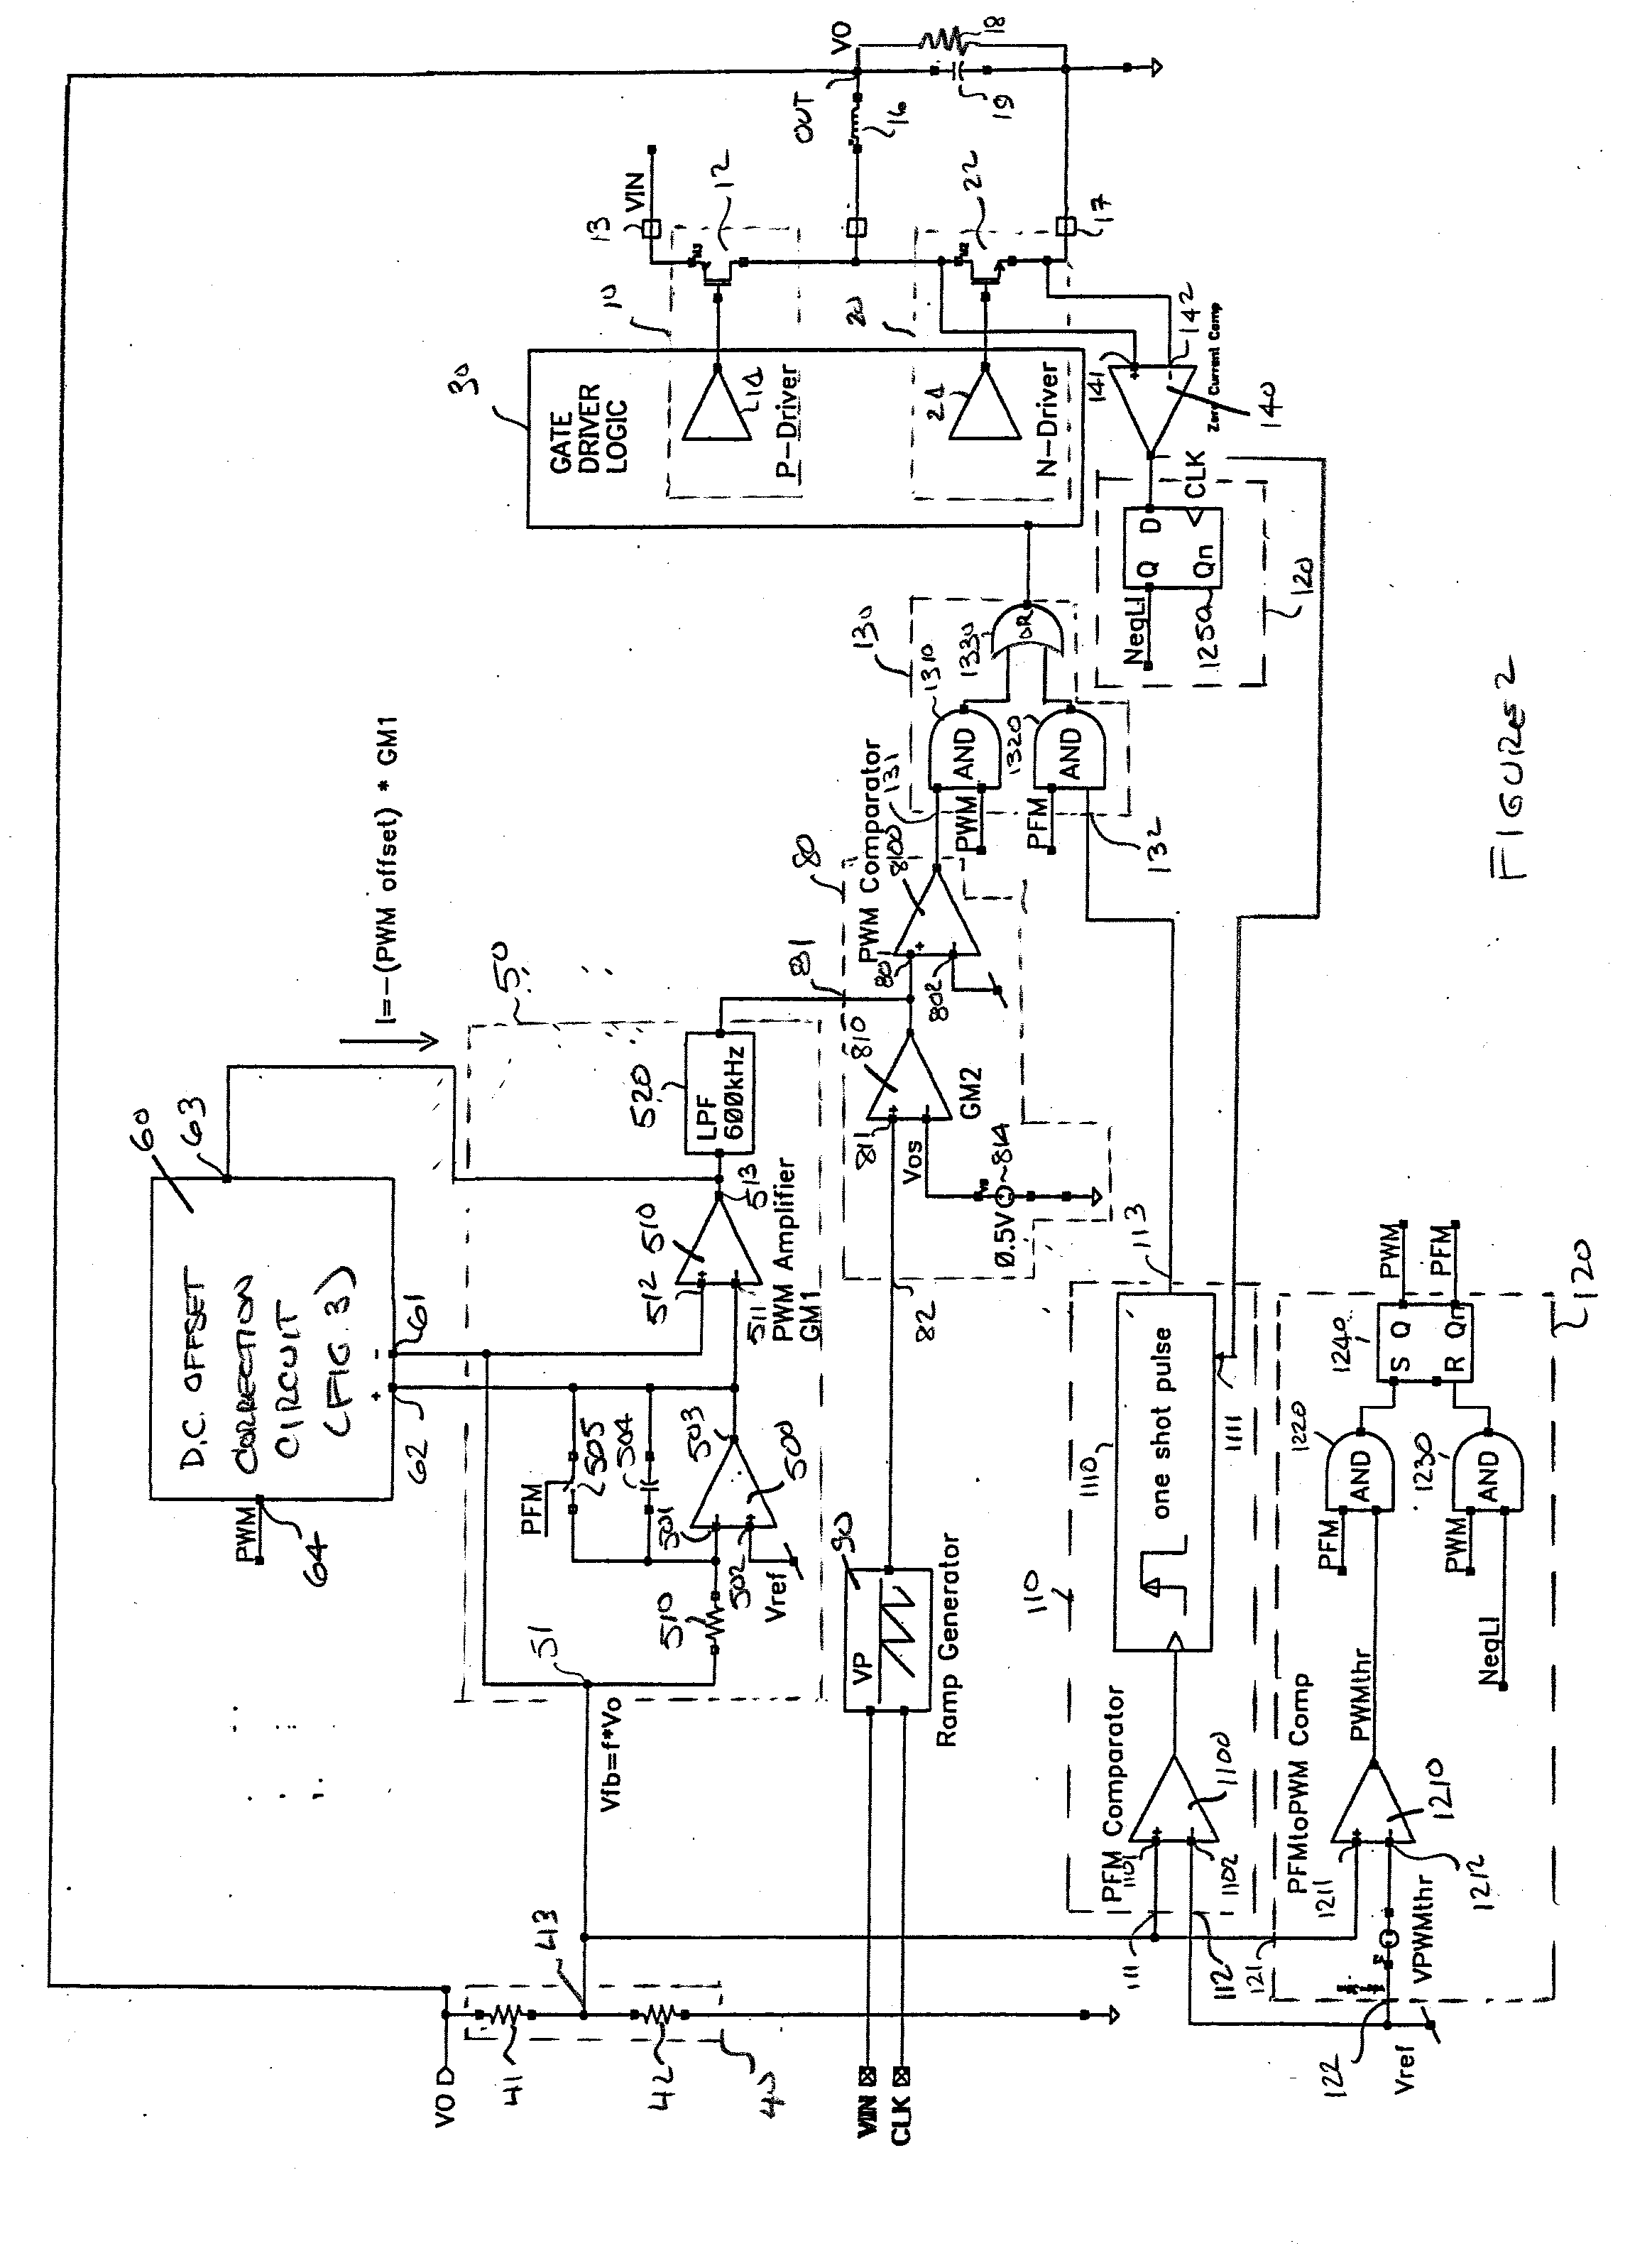 PFM-PWM DC-DC Converter Providing DC Offset Correction To PWM Error Amplifier And Equalizing Regulated Voltage Conditions When Transitioning Between PFM And PWM Modes